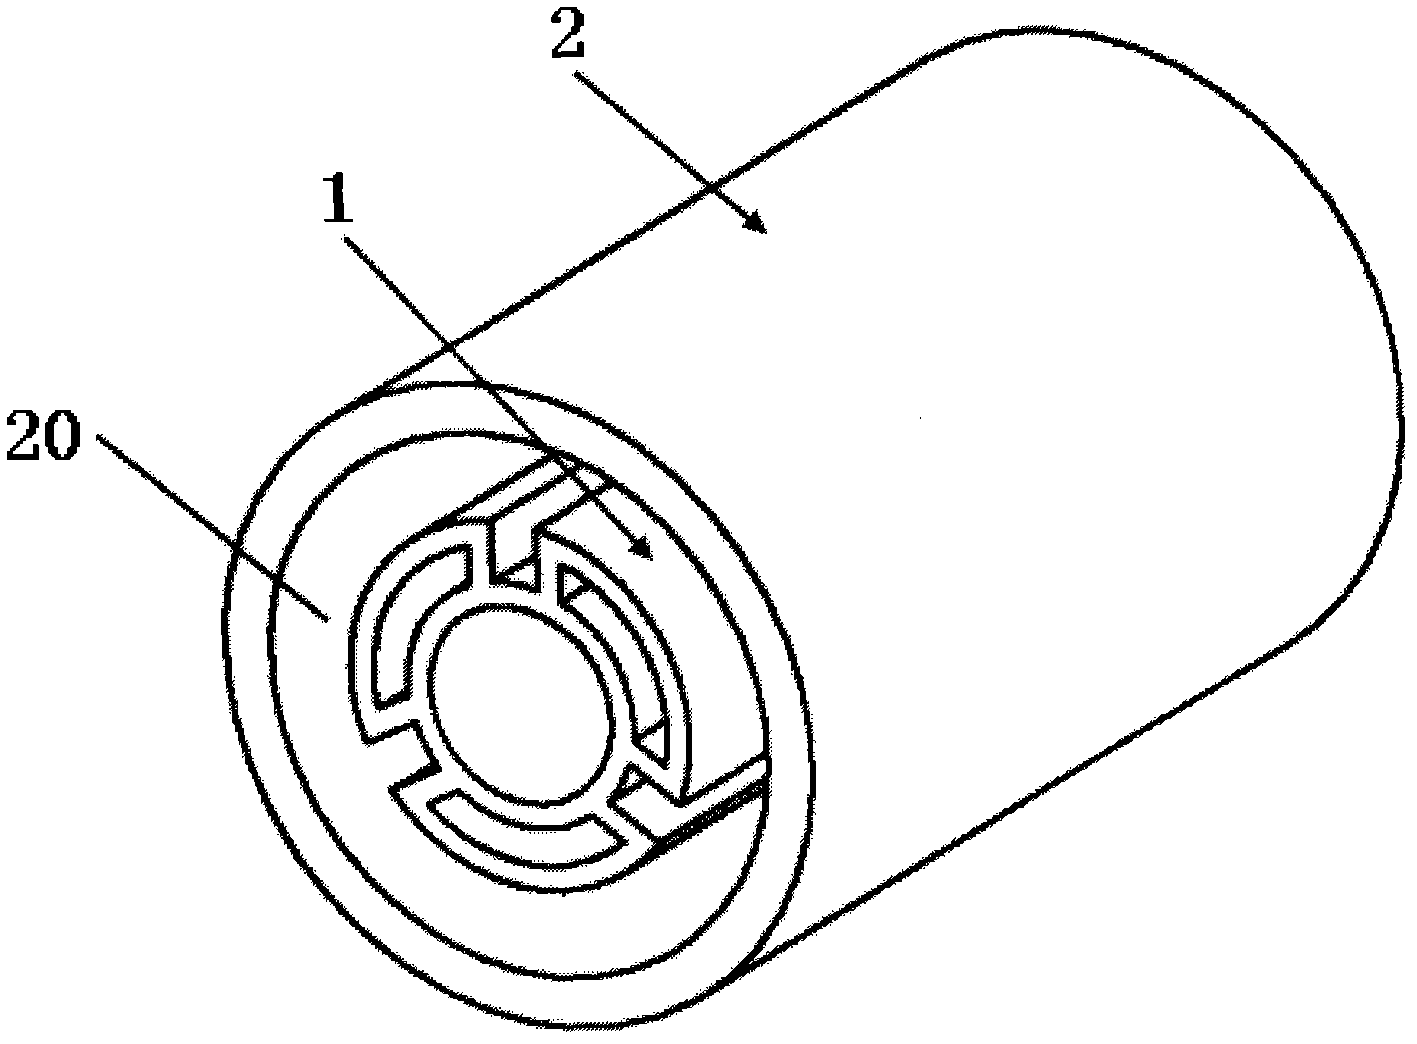 A cable mold